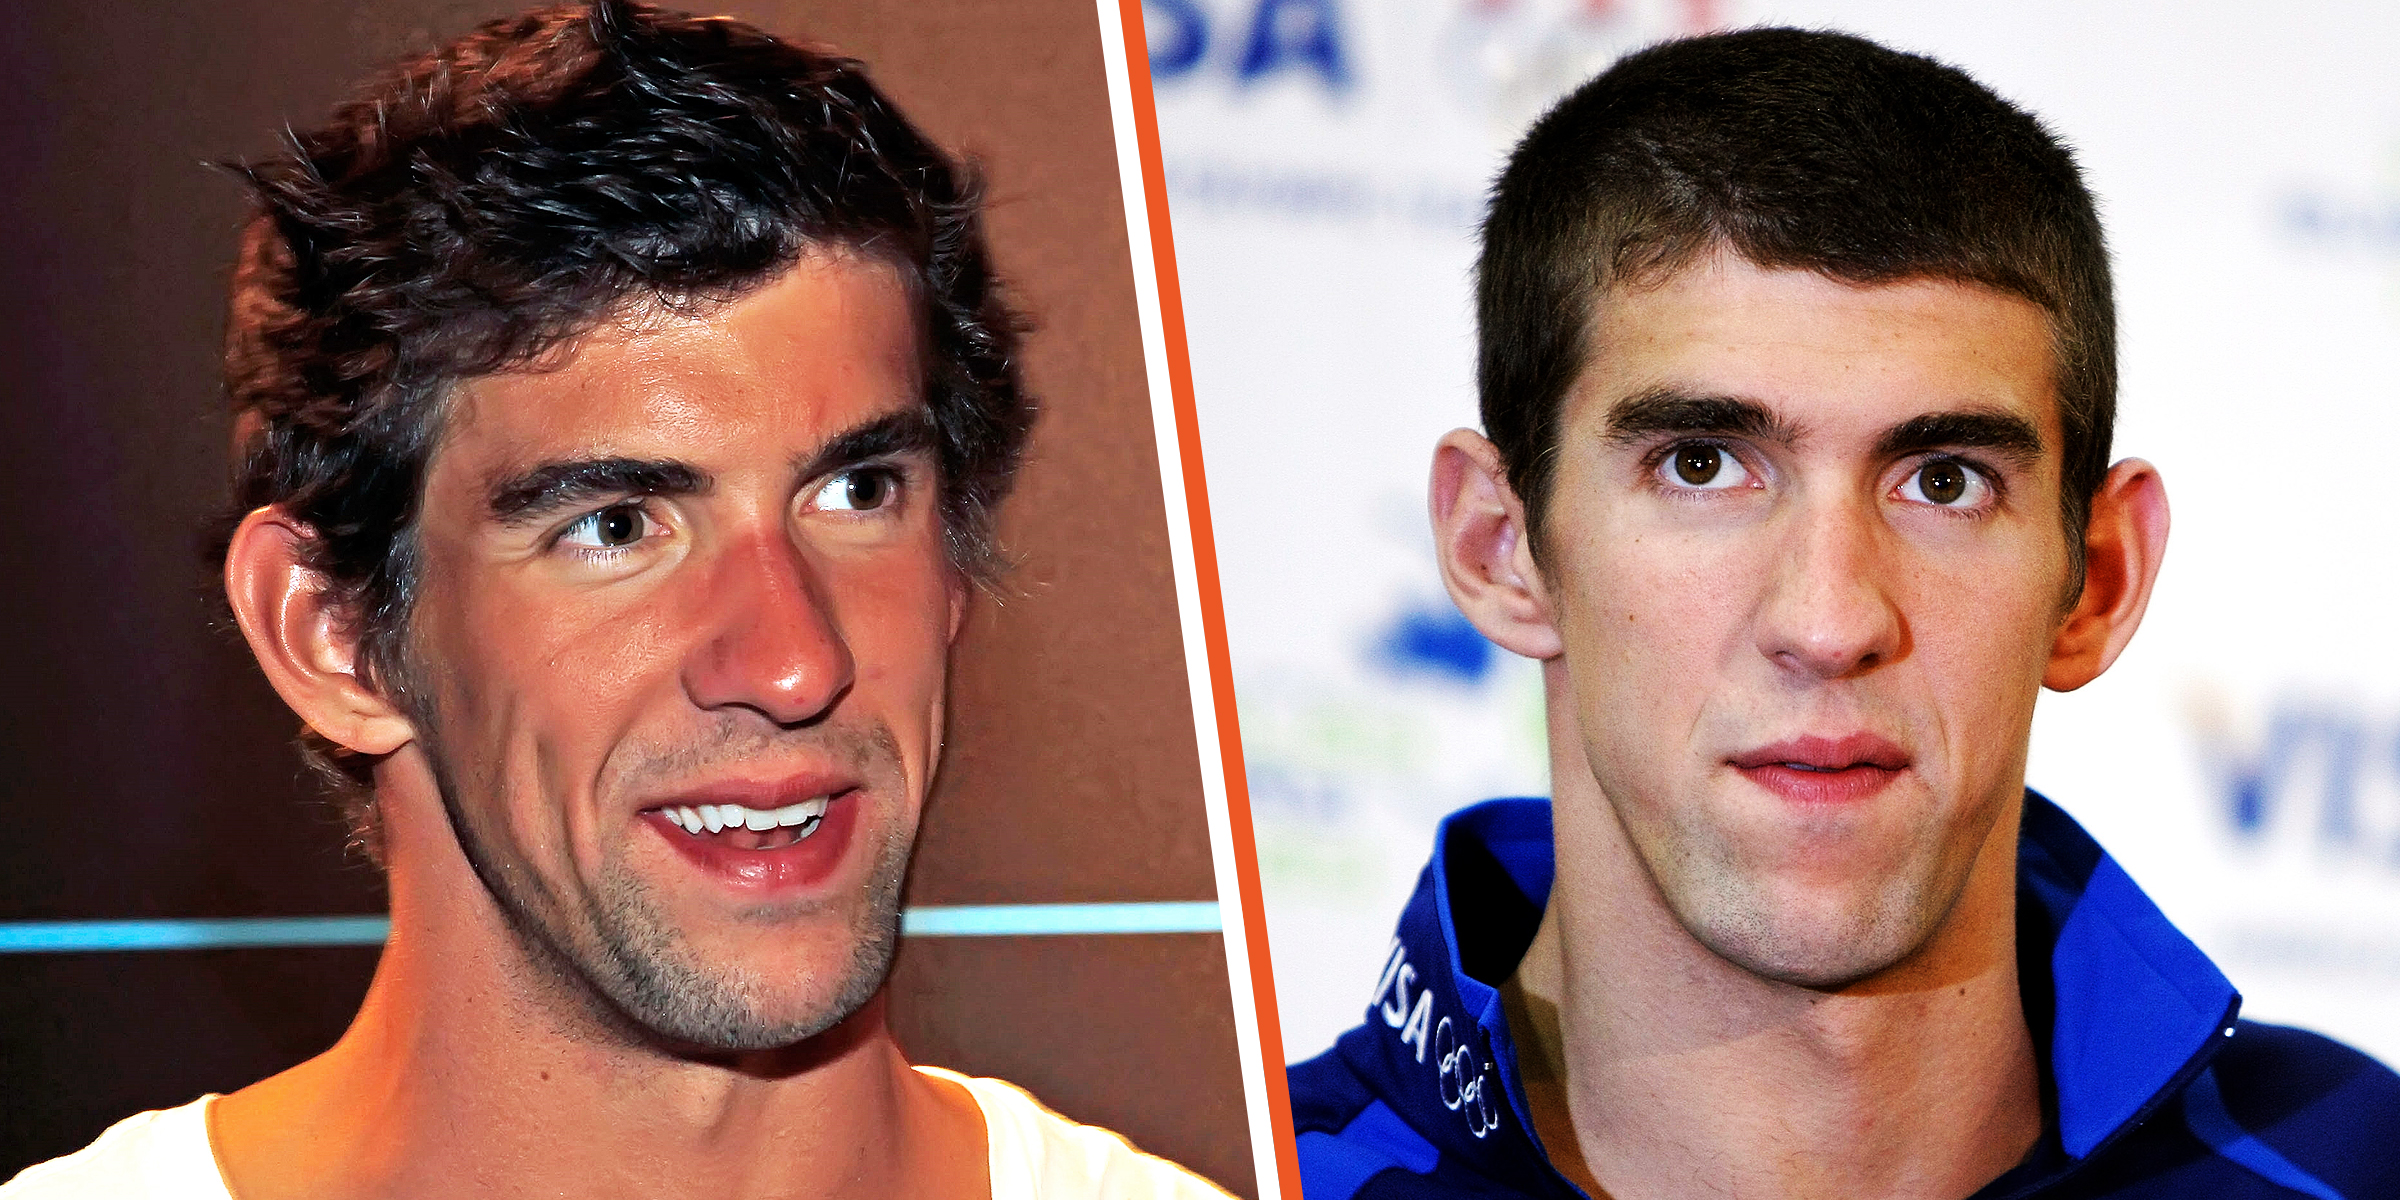 Michael Phelps | Source: Getty Images